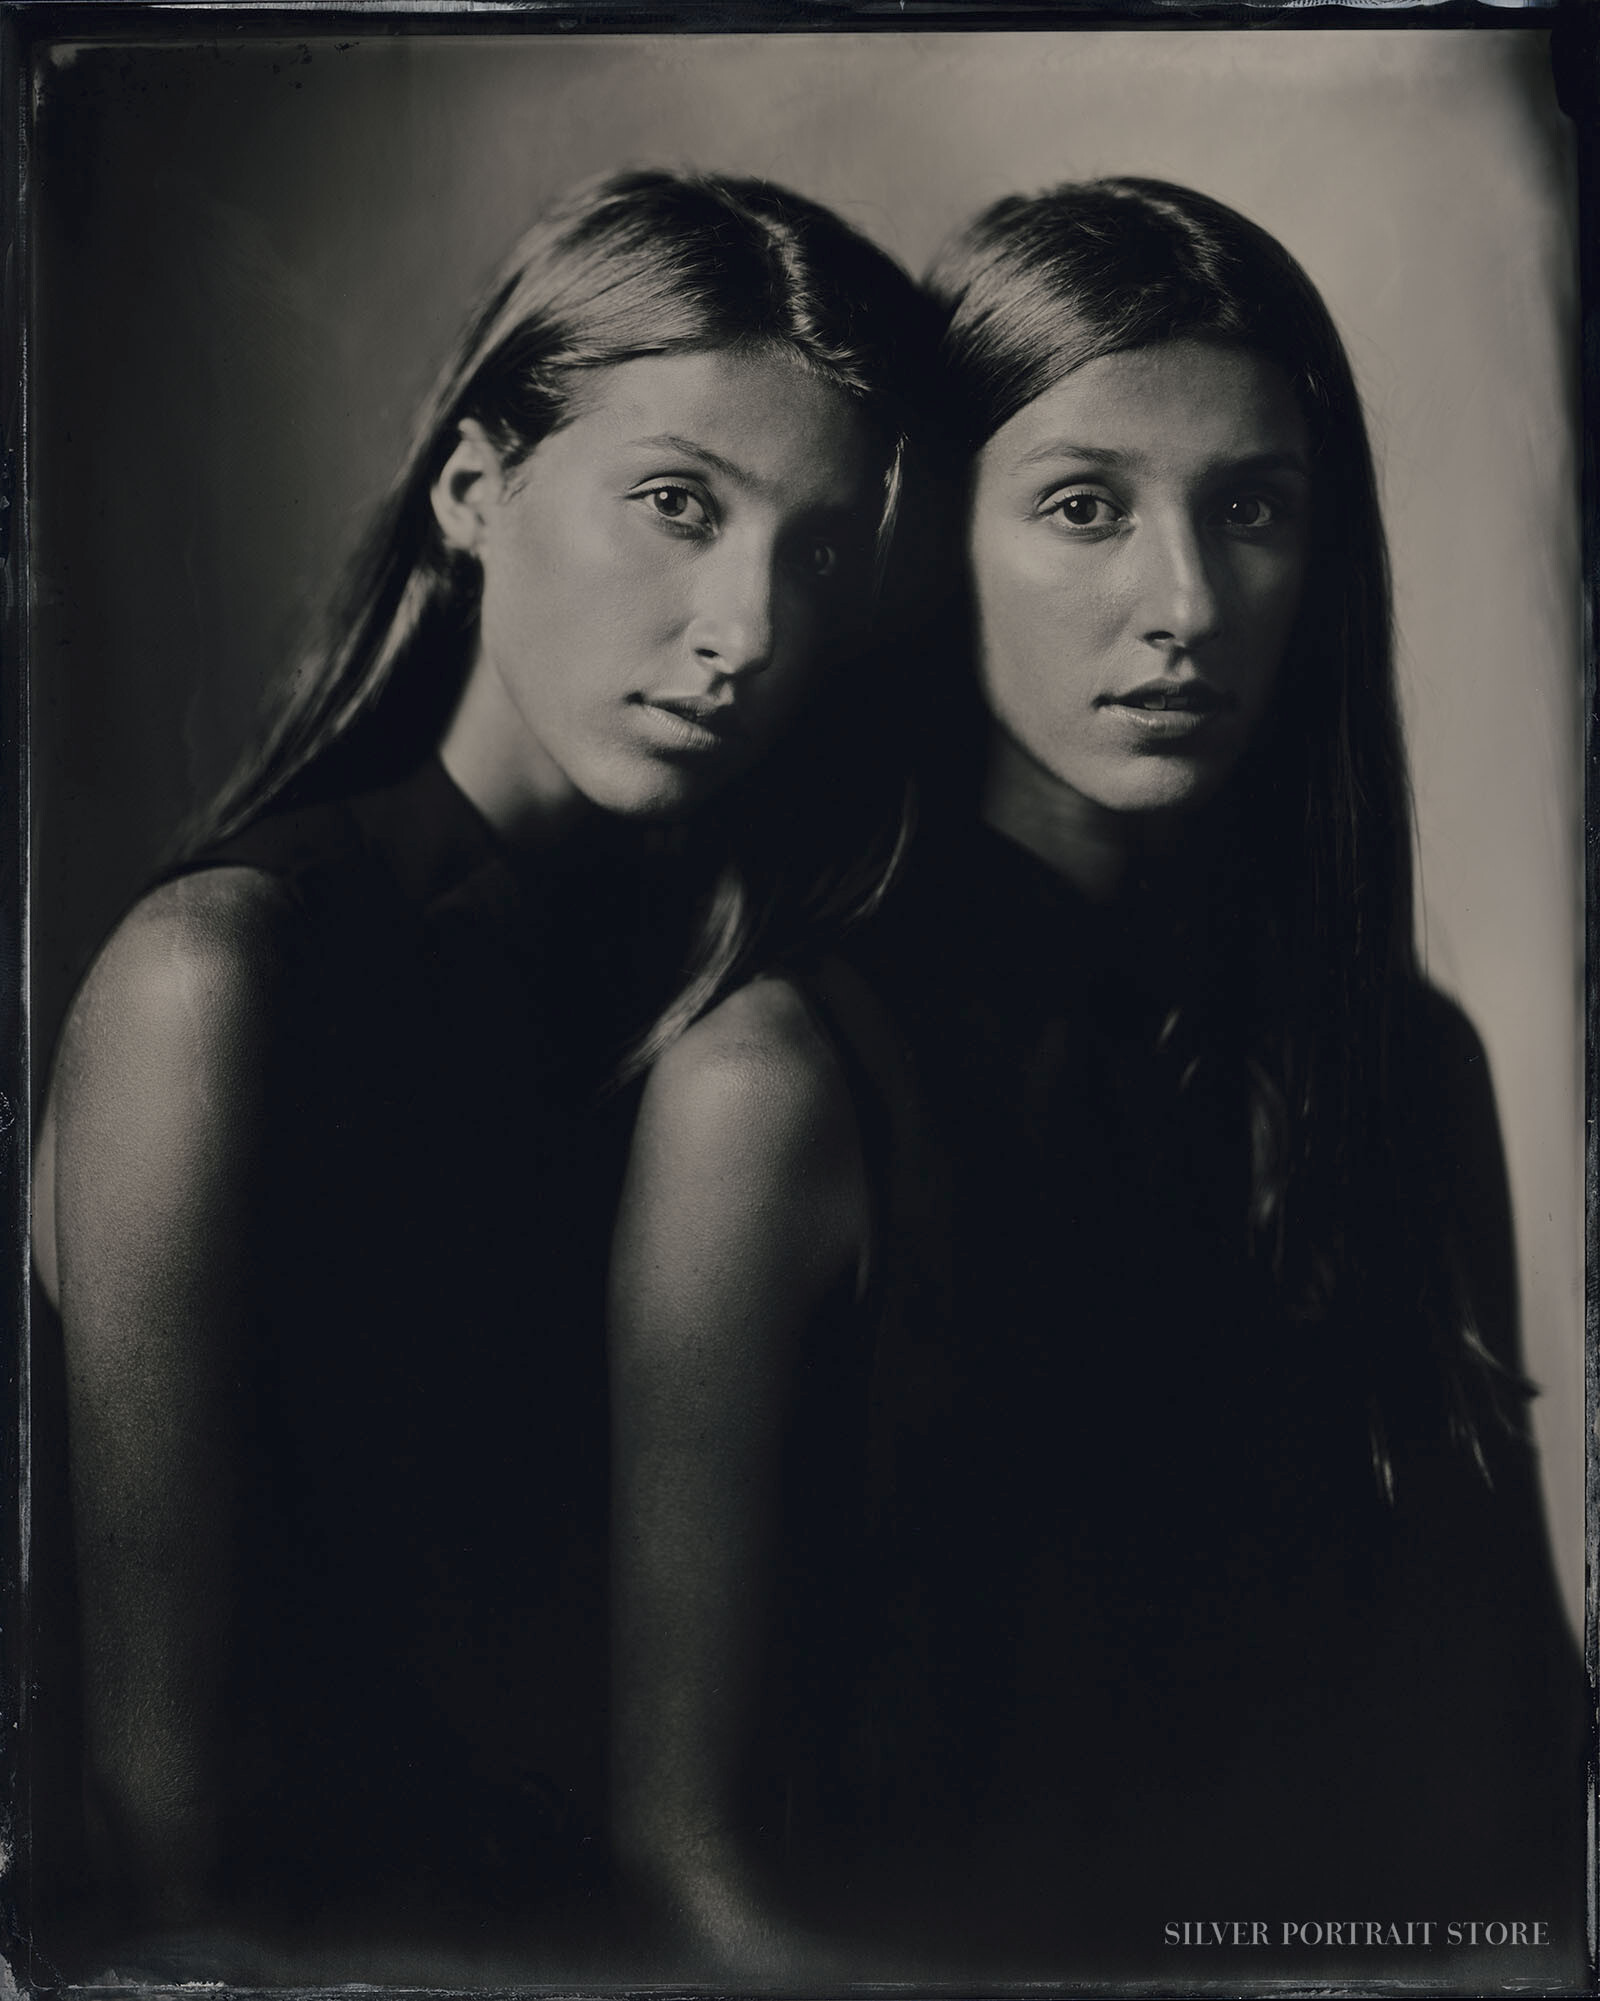 Zelda & Sammie-Silver Portrait Store-Scan from Wet plate collodion-Tintype 20 x 25 cm